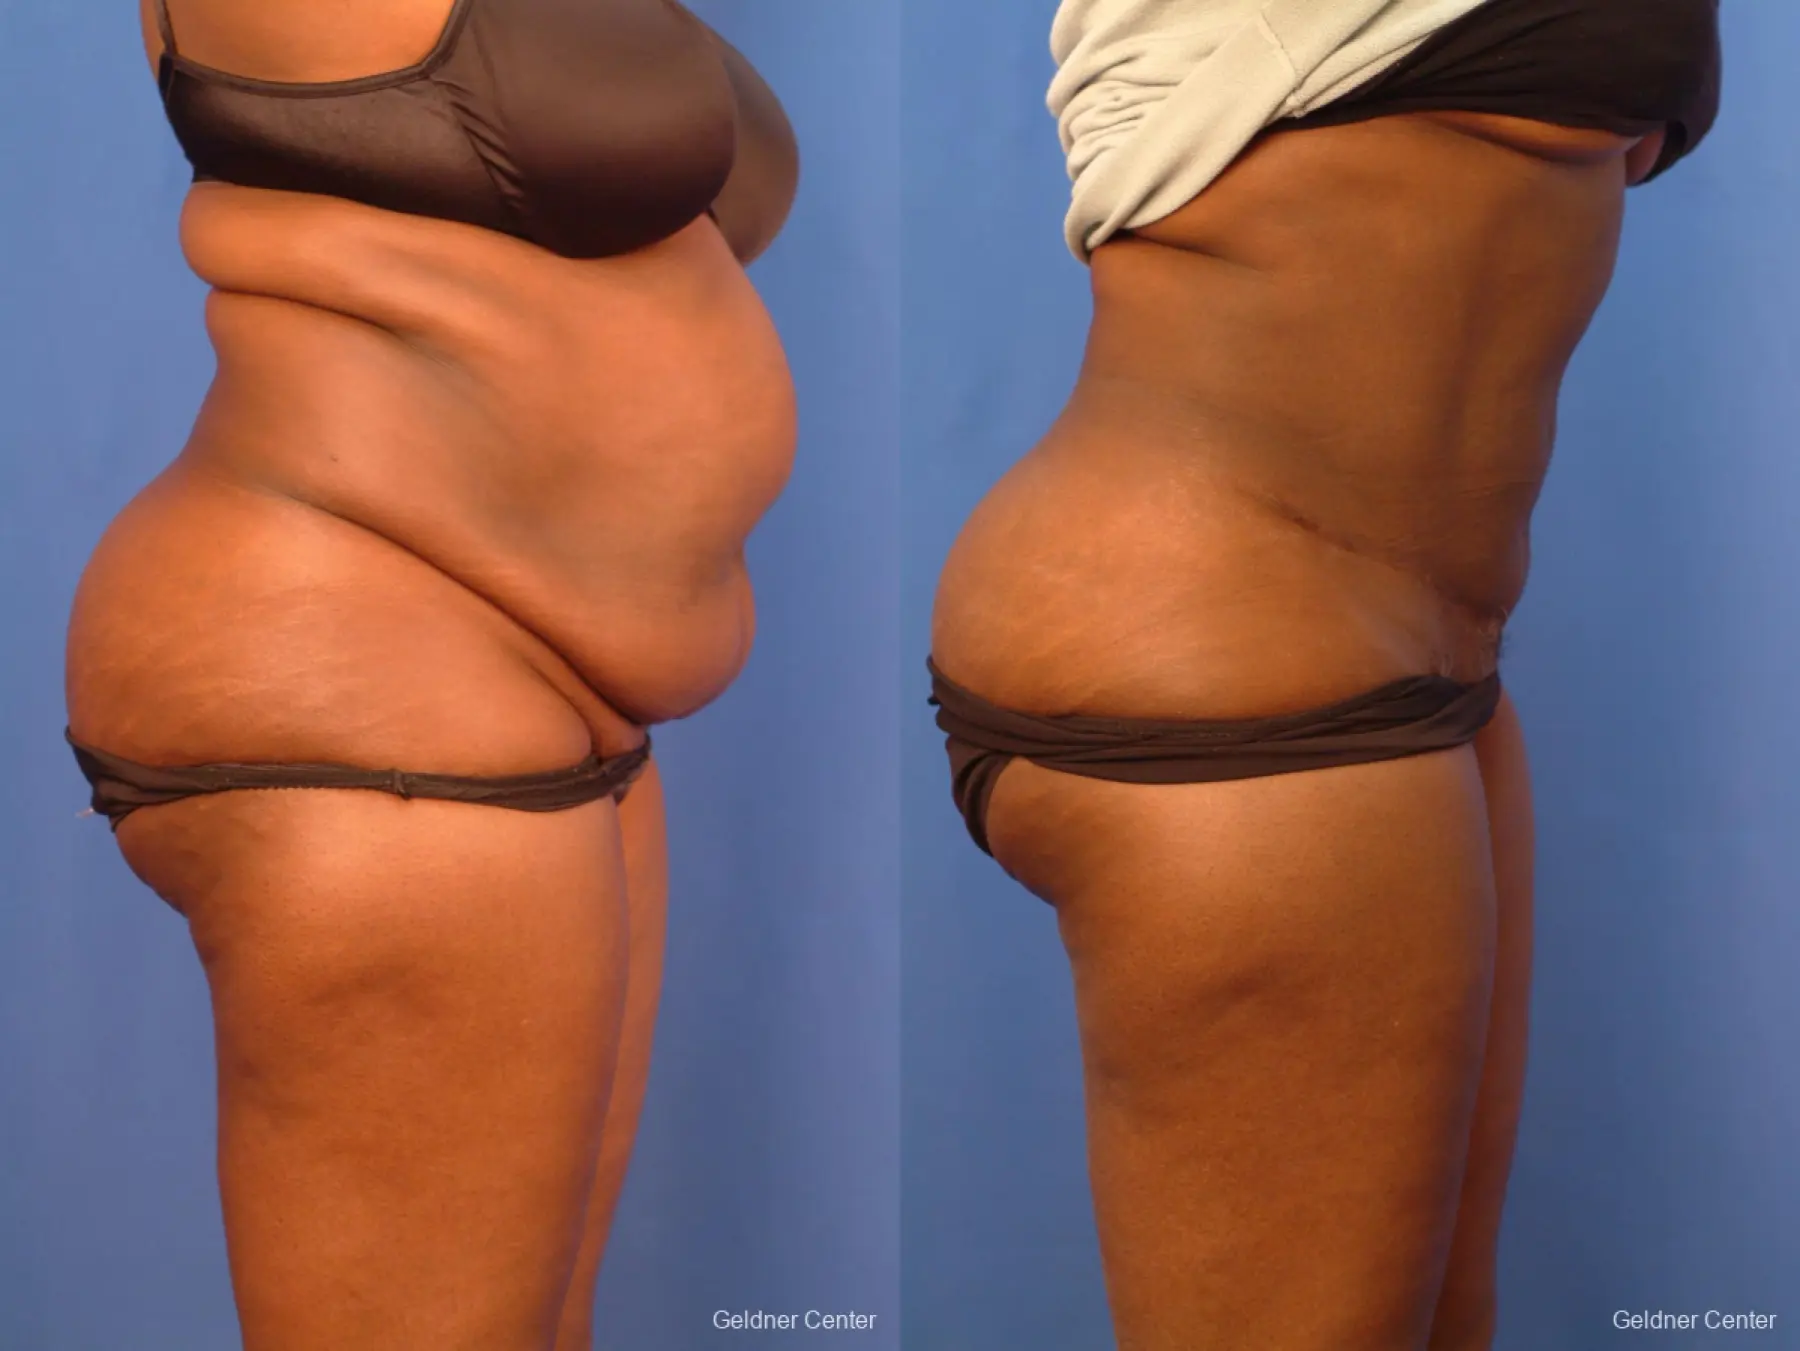 Vaser lipo patient 2540 before and after photos - Before and After 2